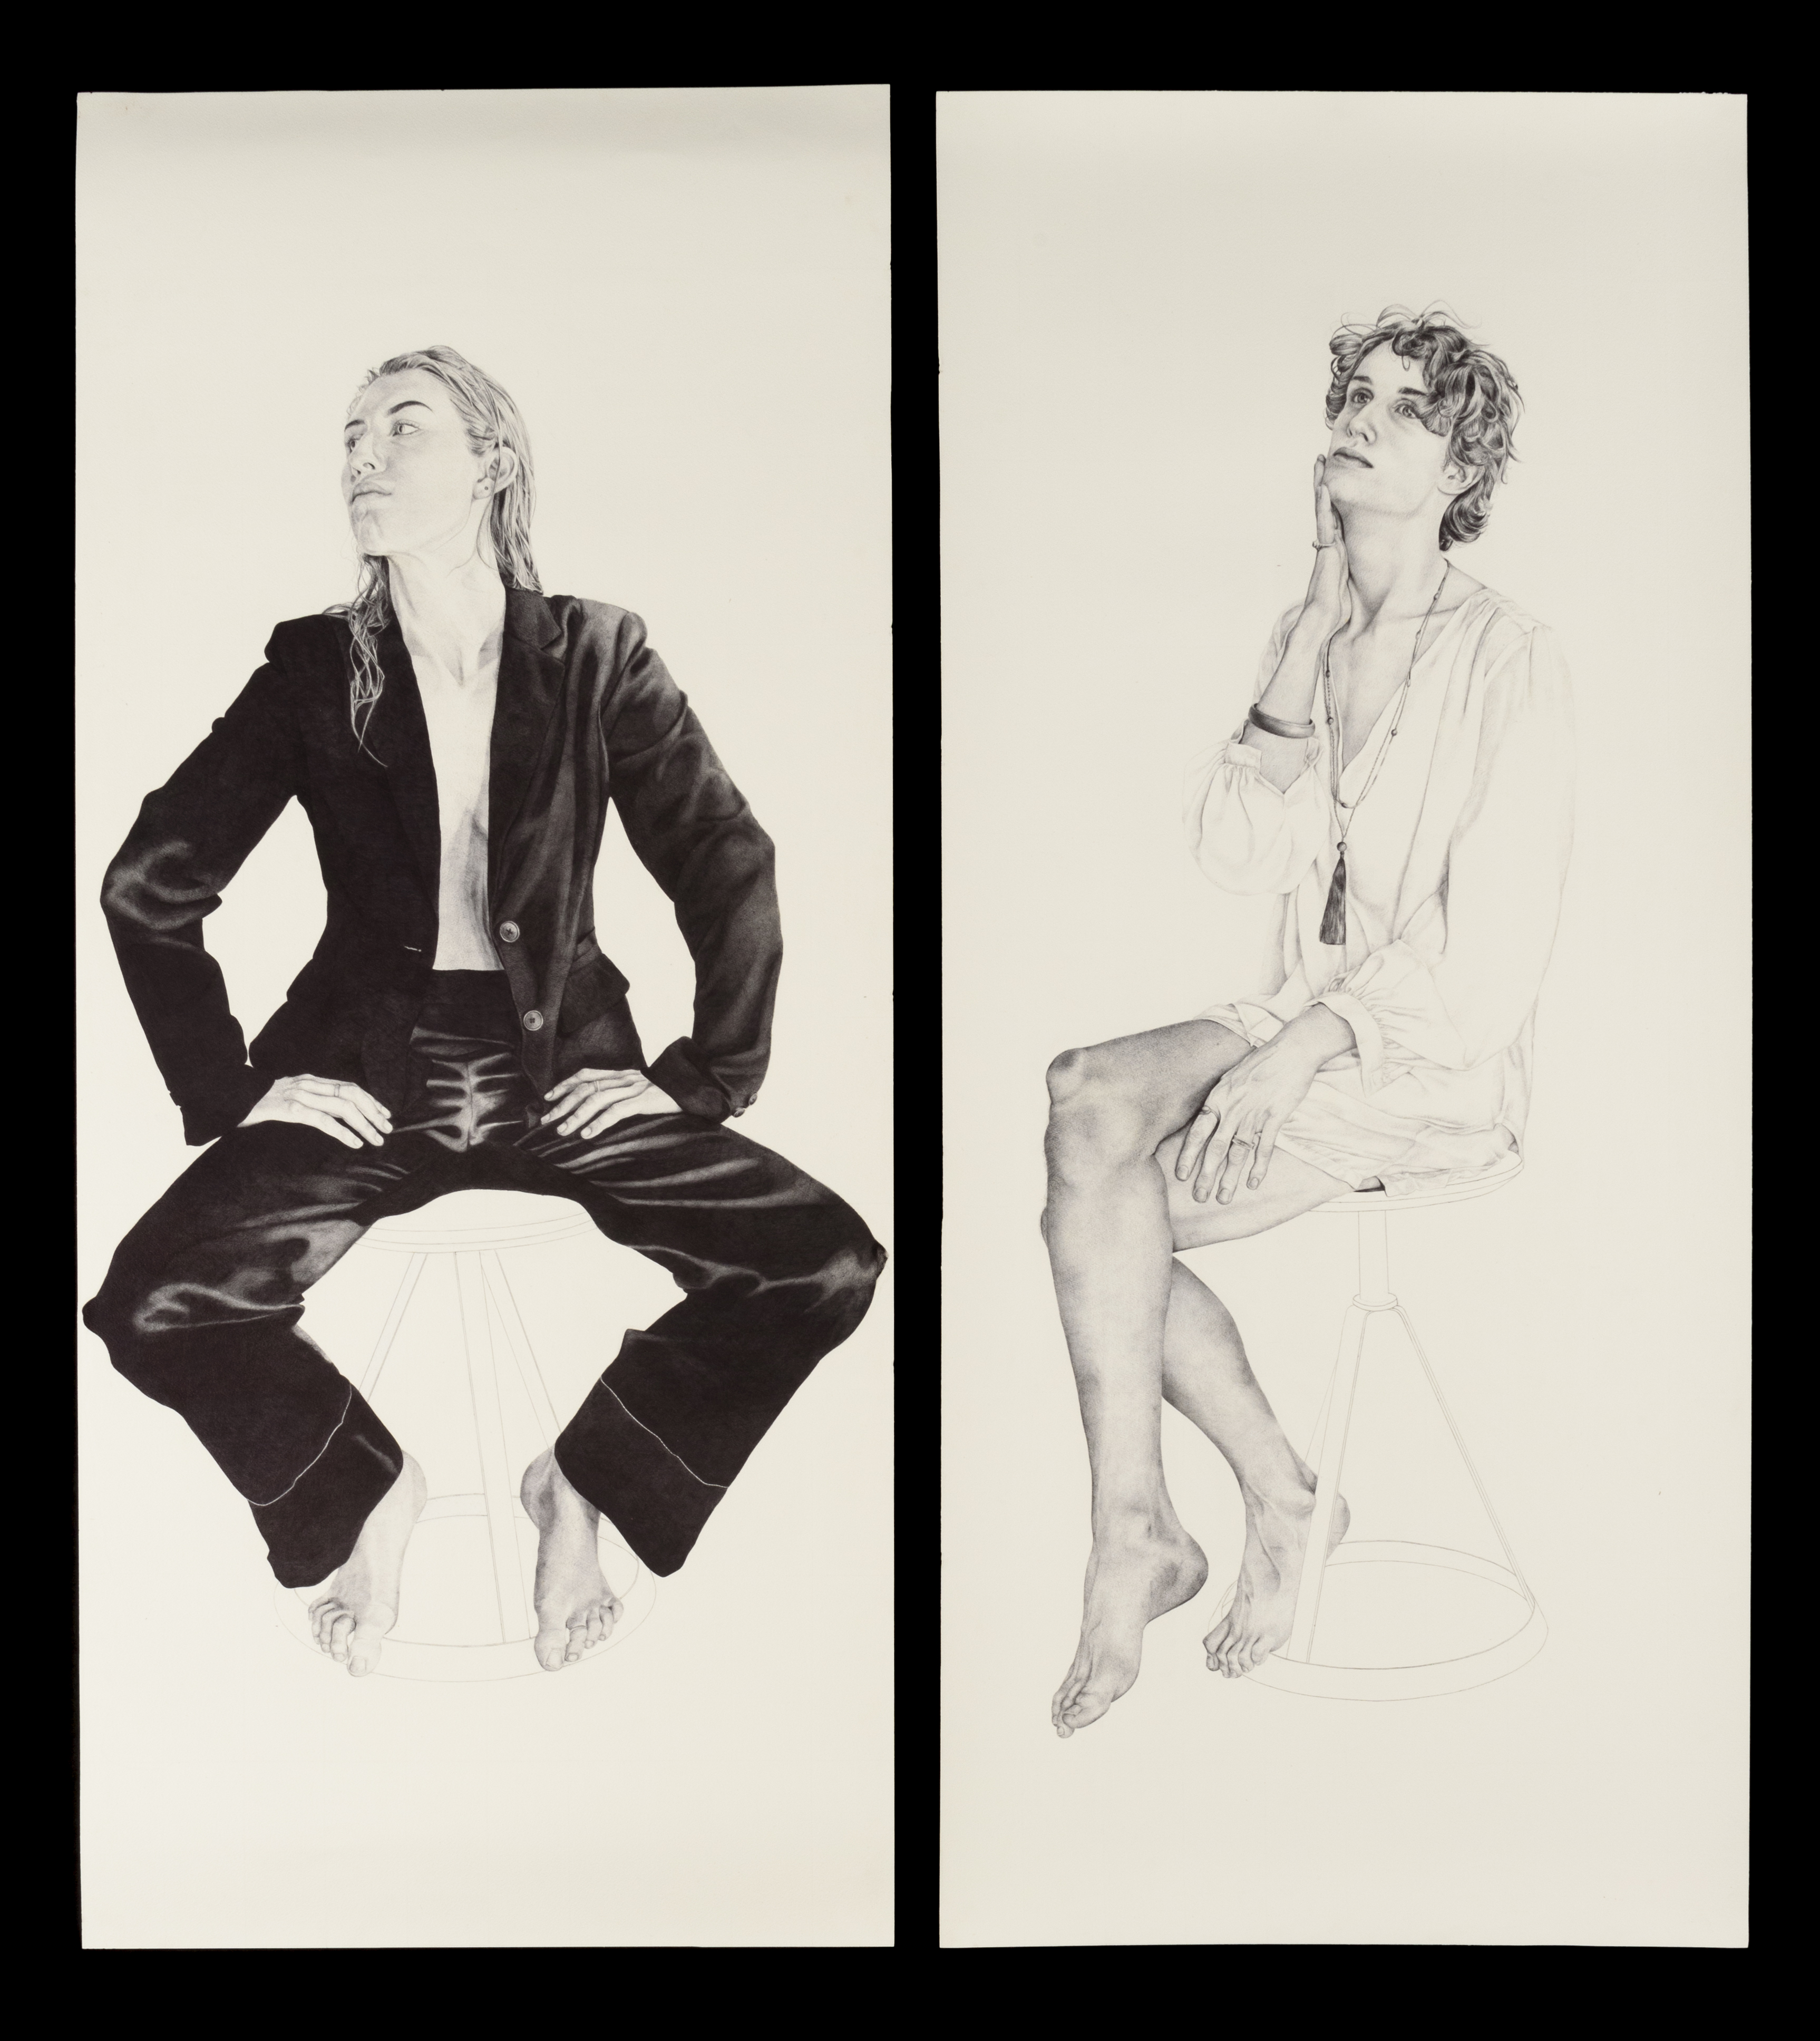 Two large black and white pen drawings, on the left is a woman and on the right is a man.